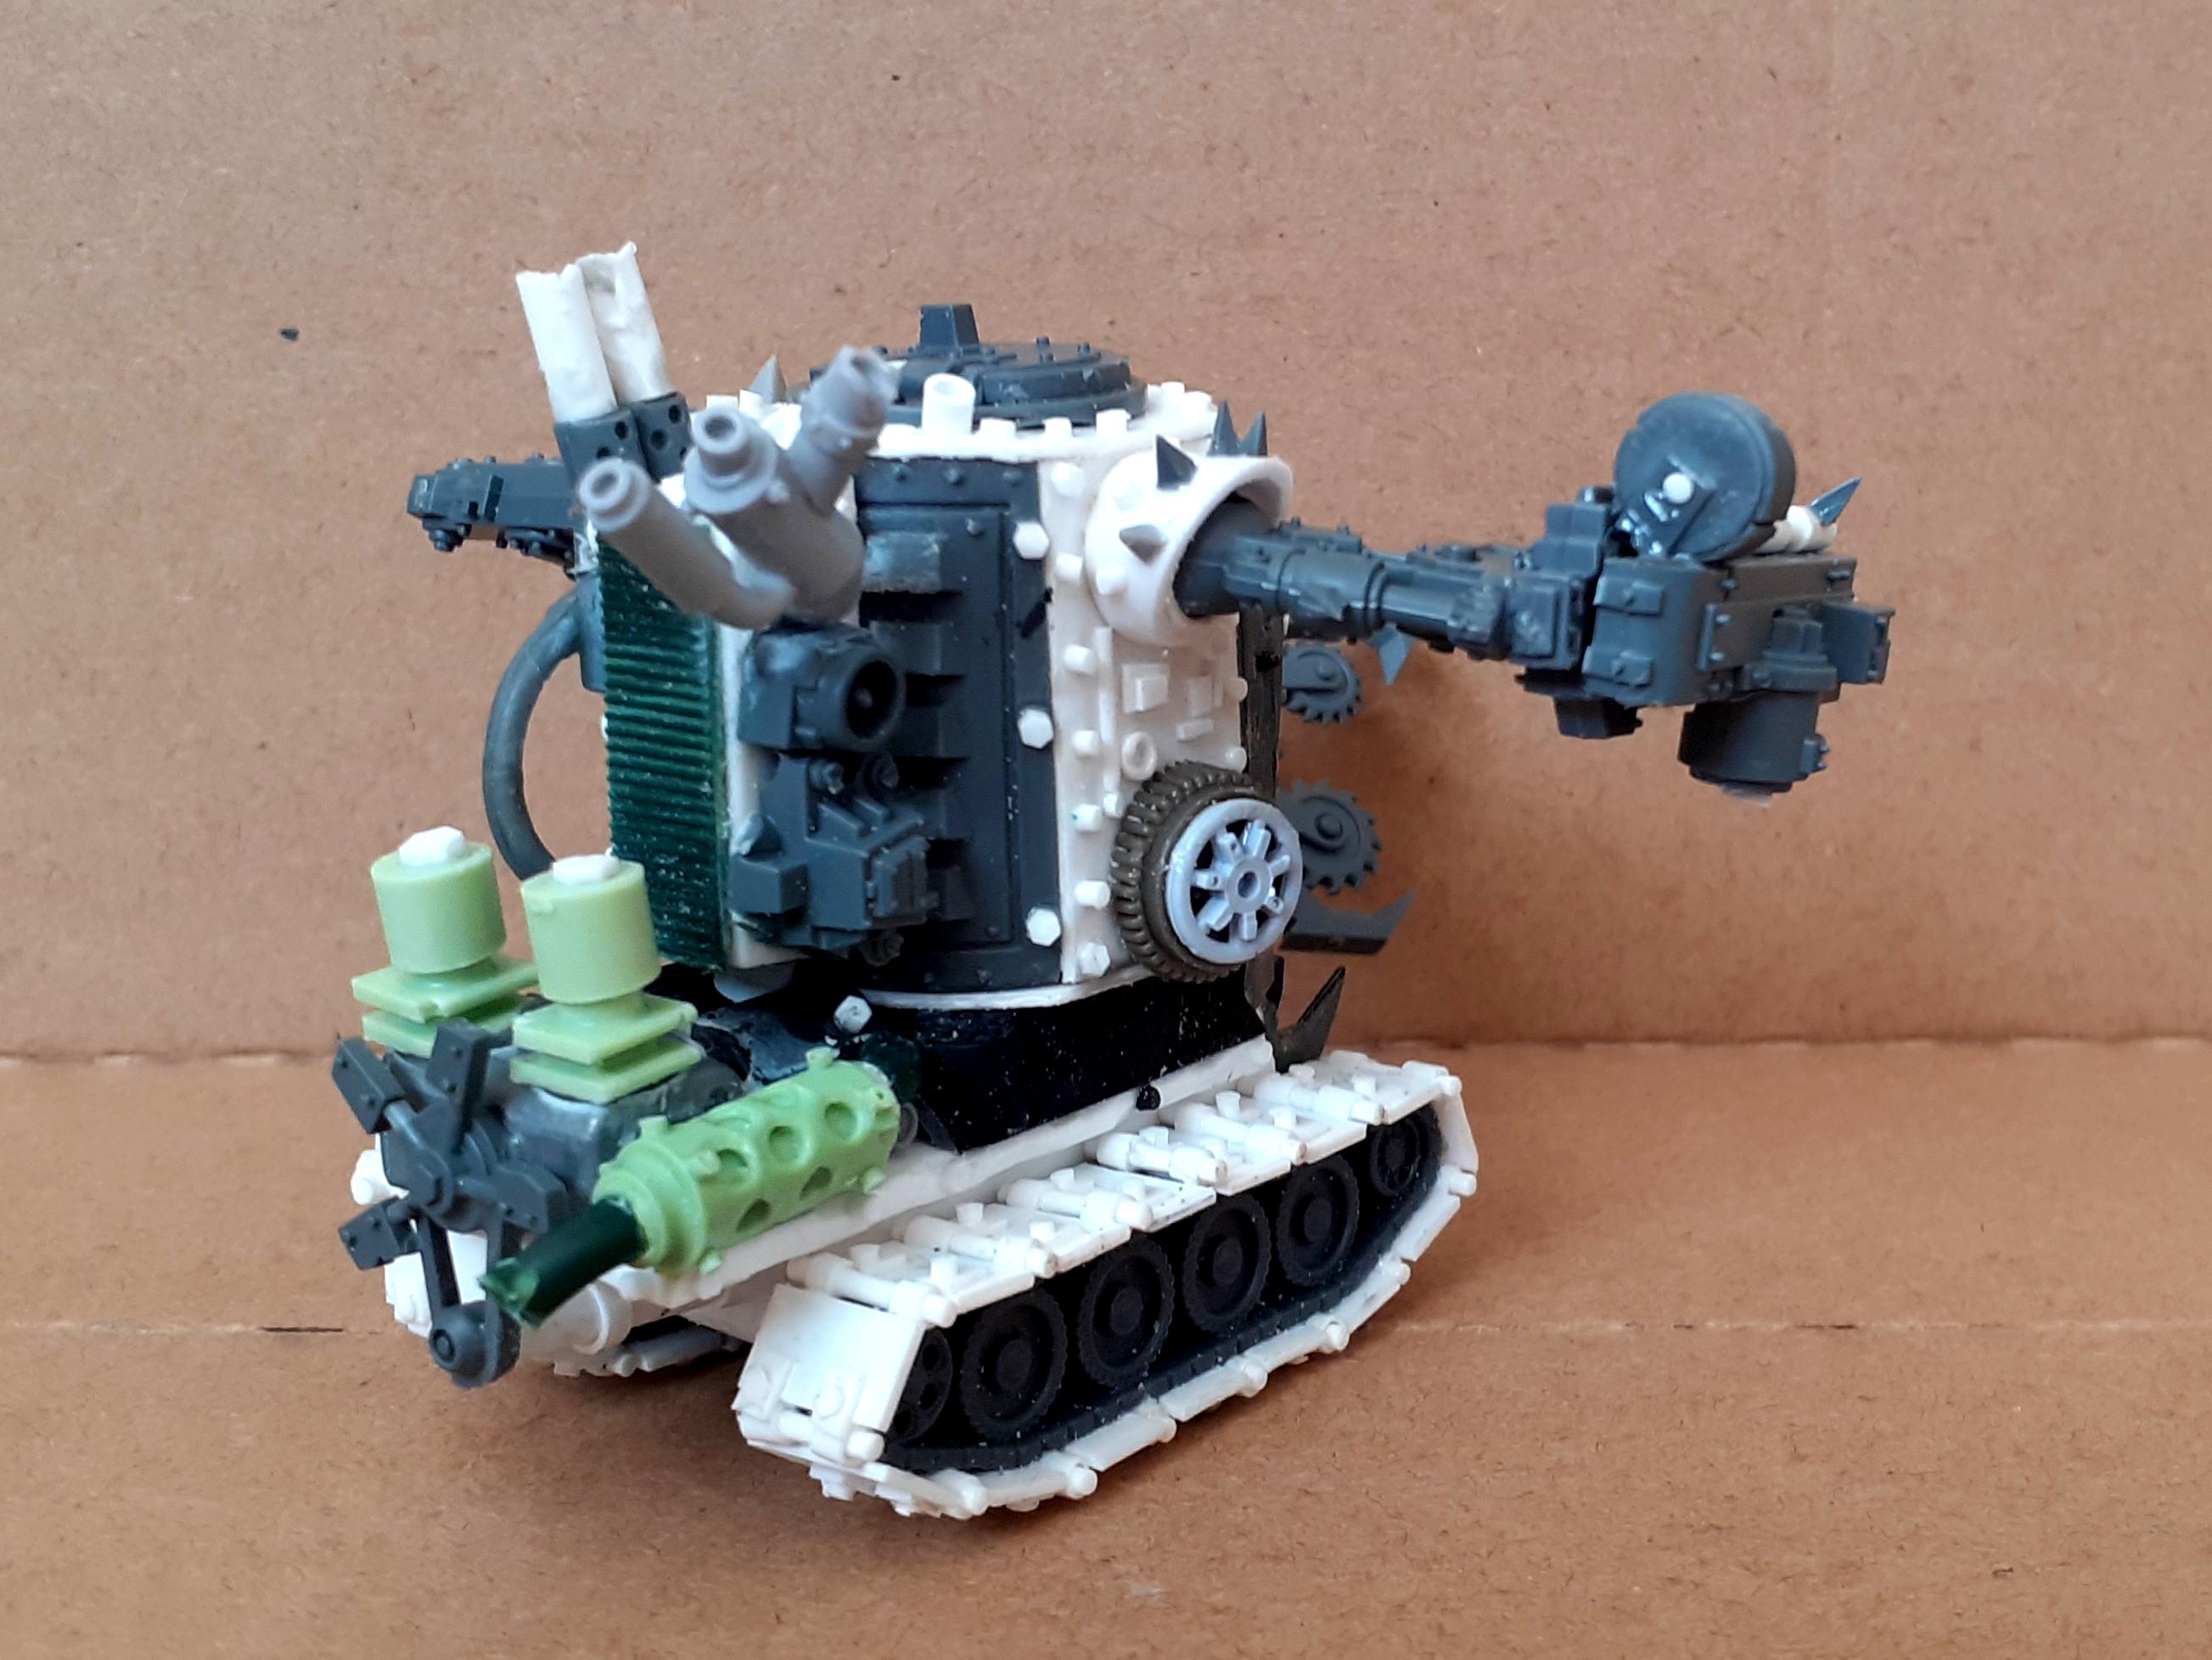 Conversion, Grot Conversion, Grot Tank, Grots, Killa Kan, Kitbash, Kitbashed, Ork Conversions, Ork Coustom Made Vehicratch Builcles, Orks, Scratch Build, Sd